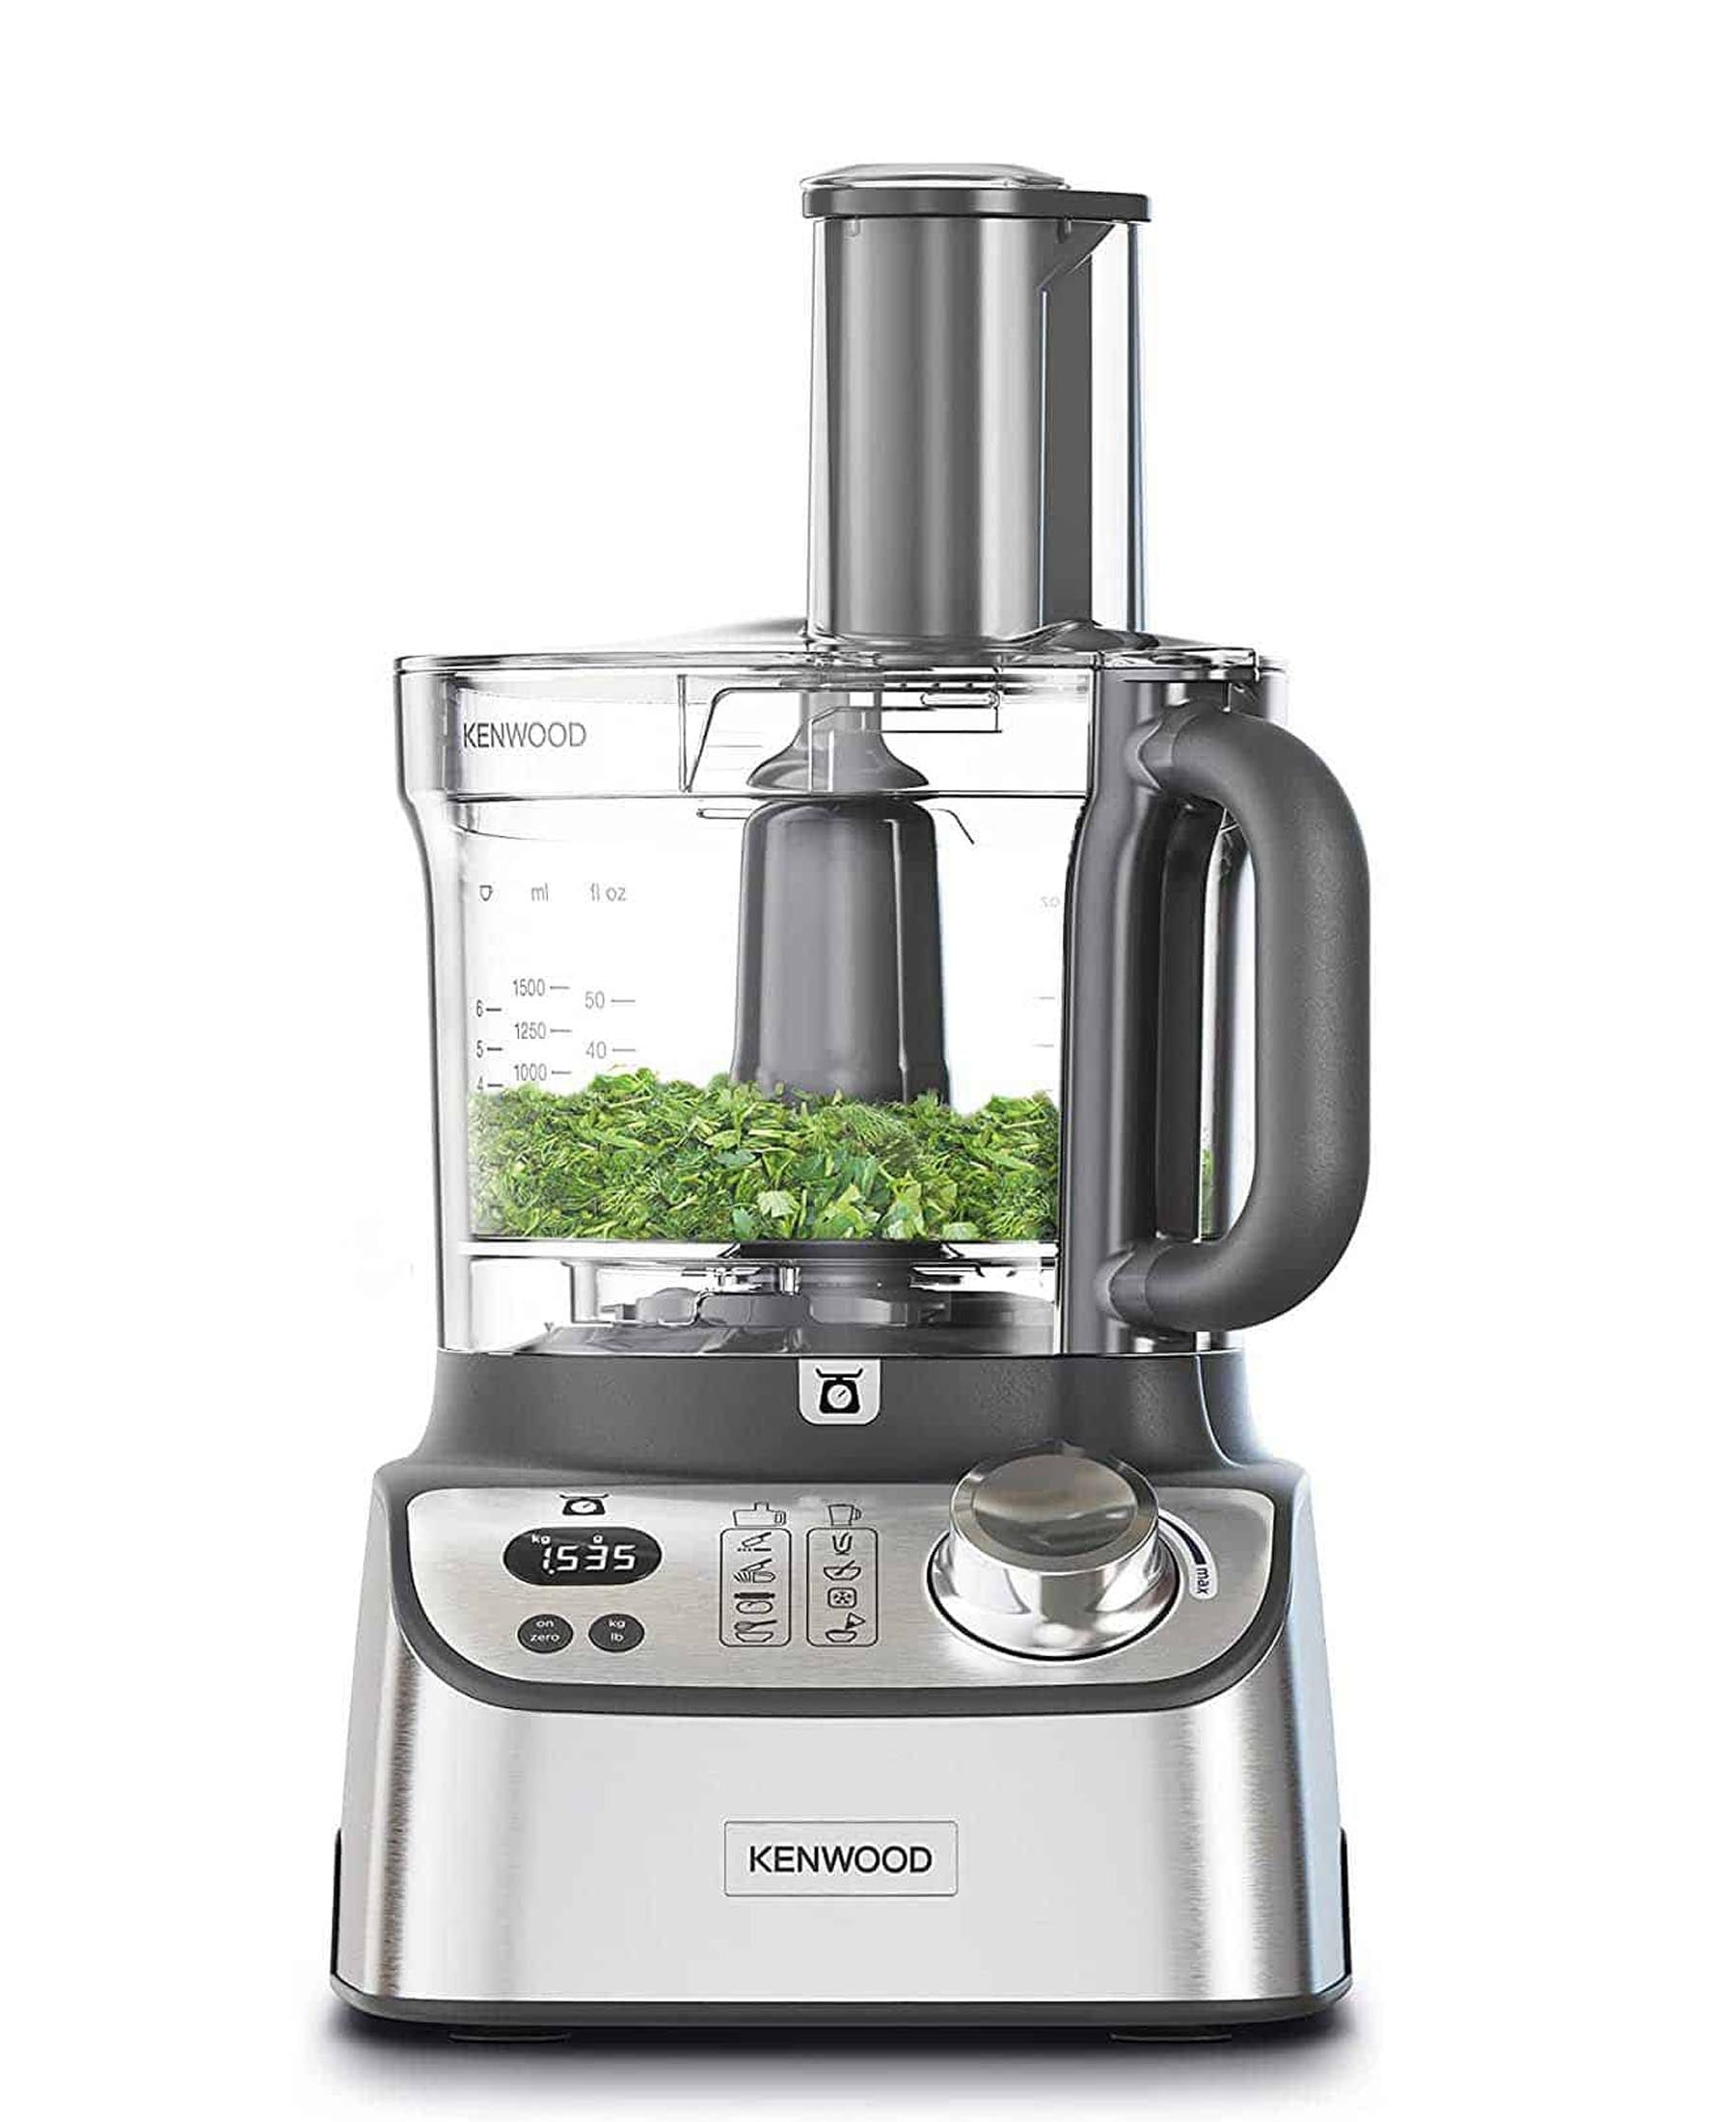 Kenwood MultiPro Express Weigh+ 3L Food Processor - Silver